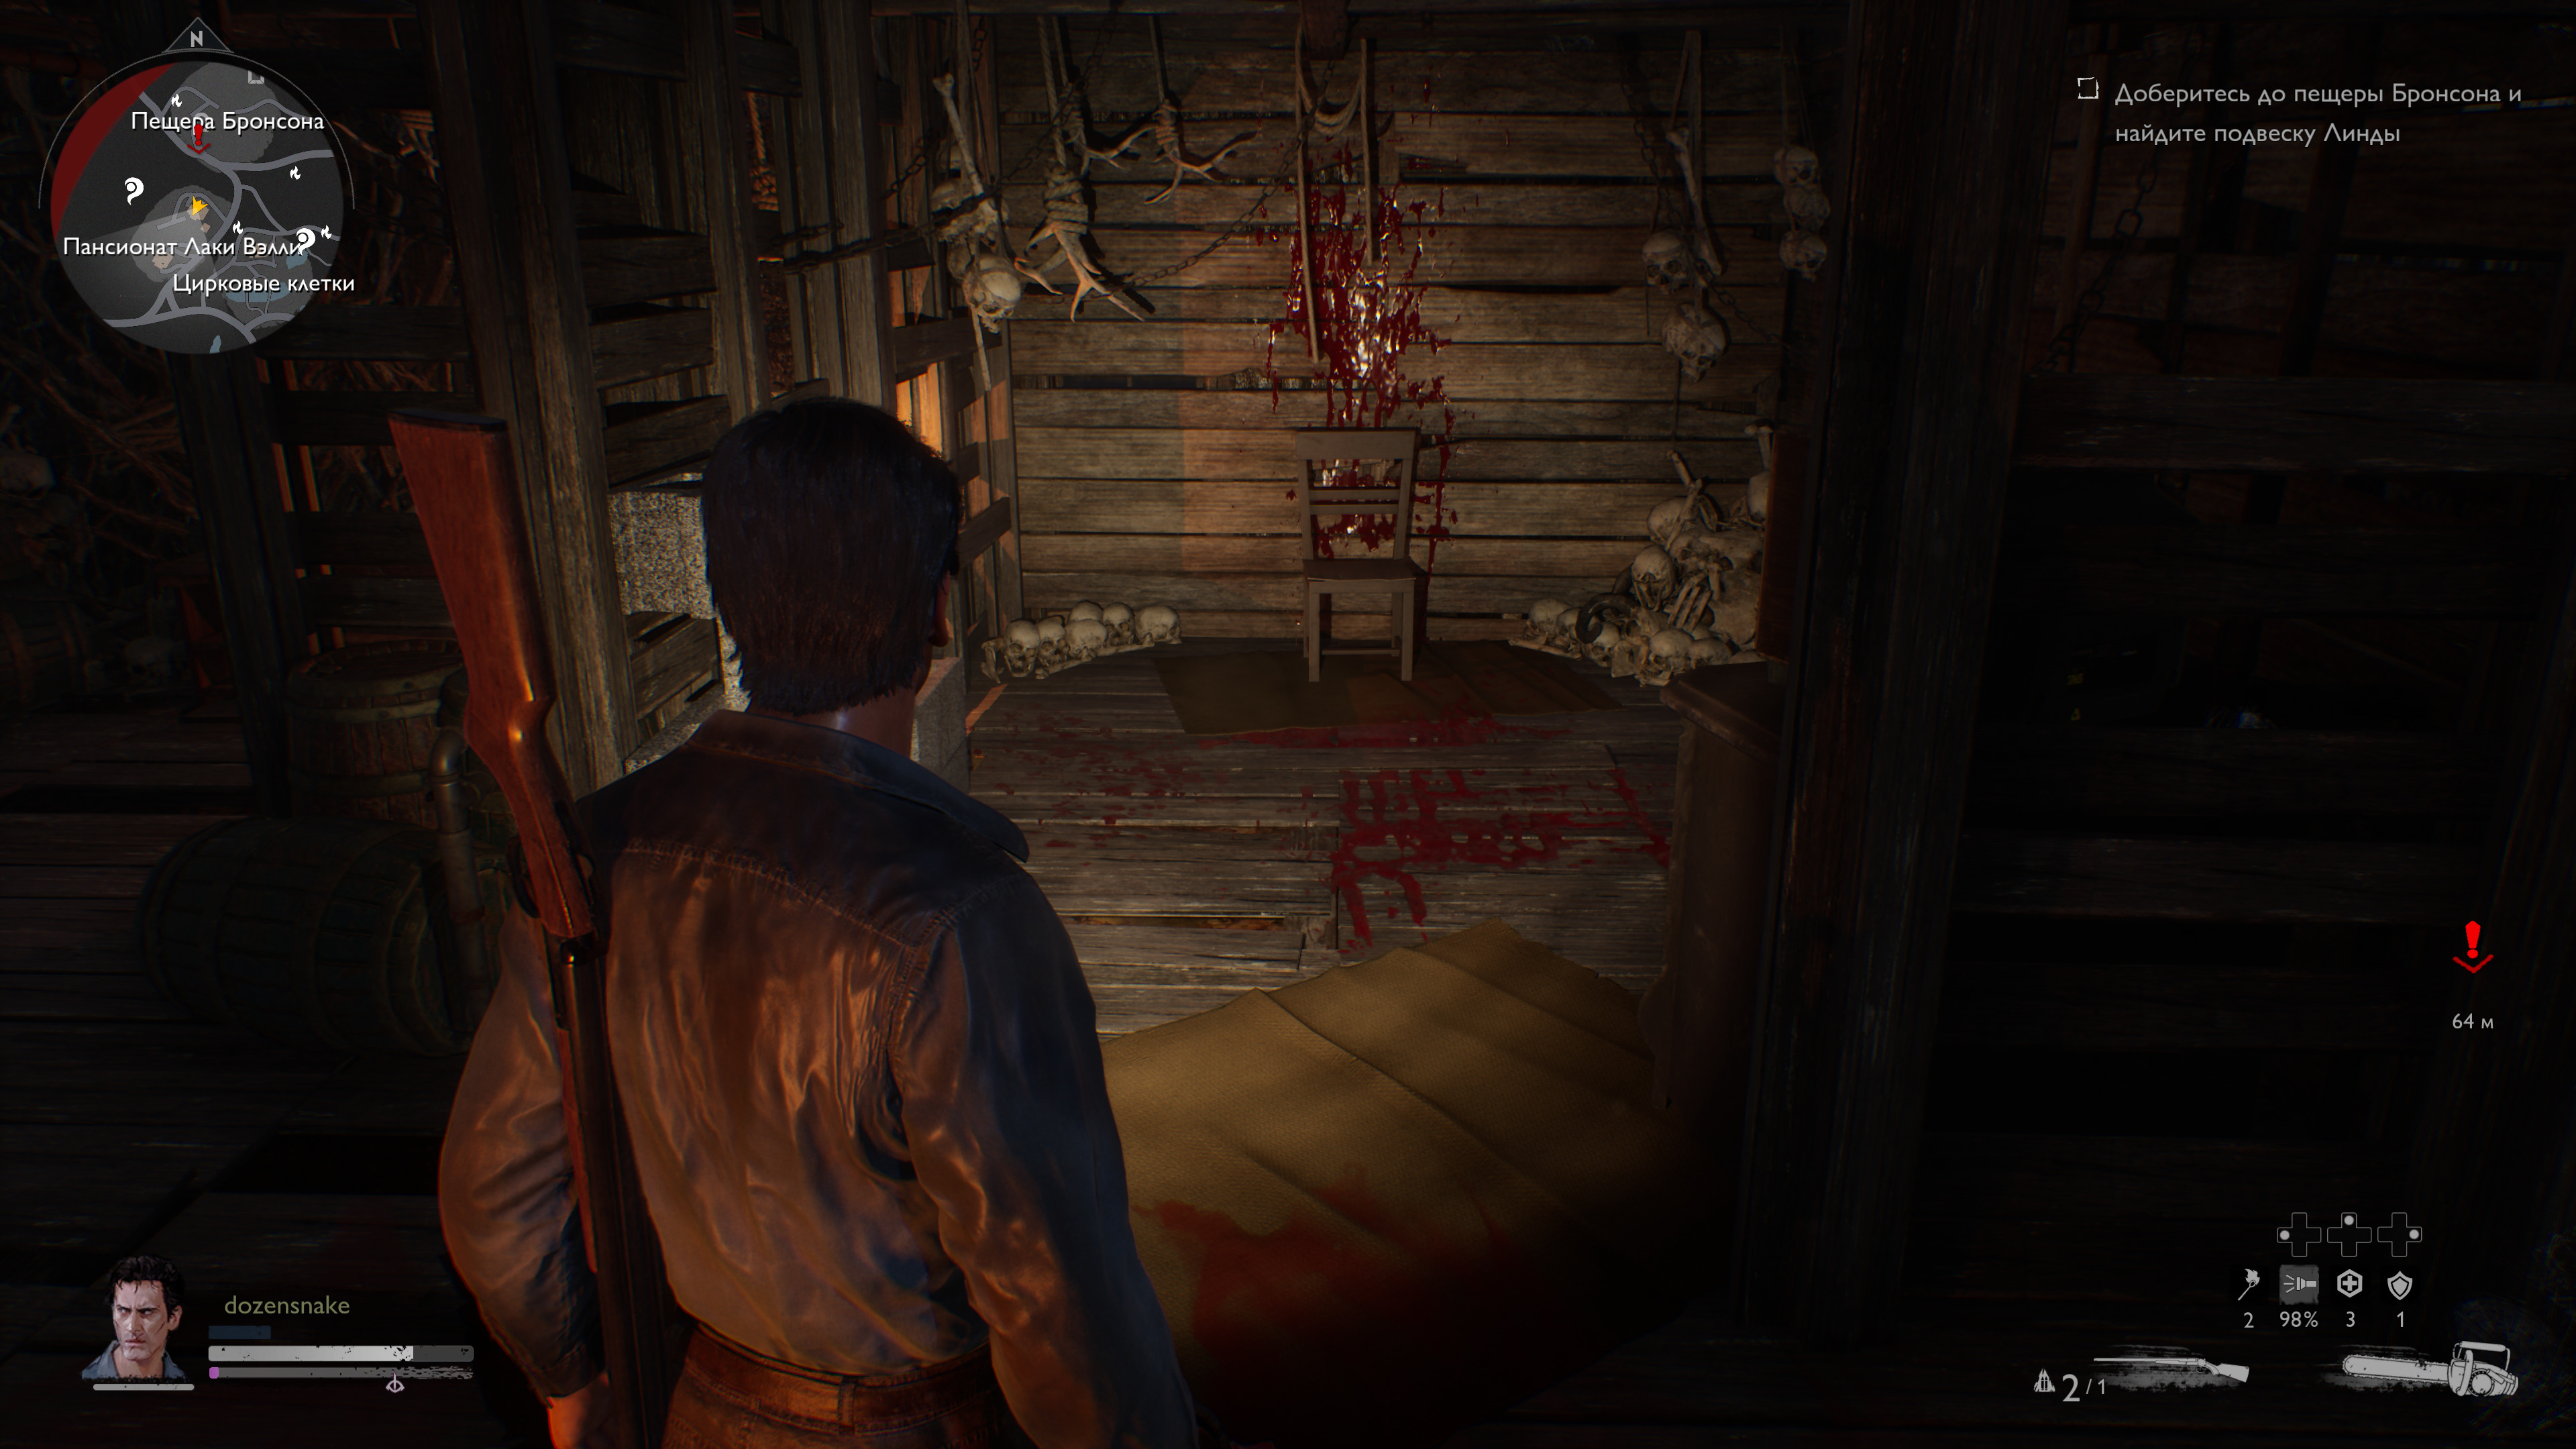 Hail to the King, baby: Обзор Evil Dead: The Game